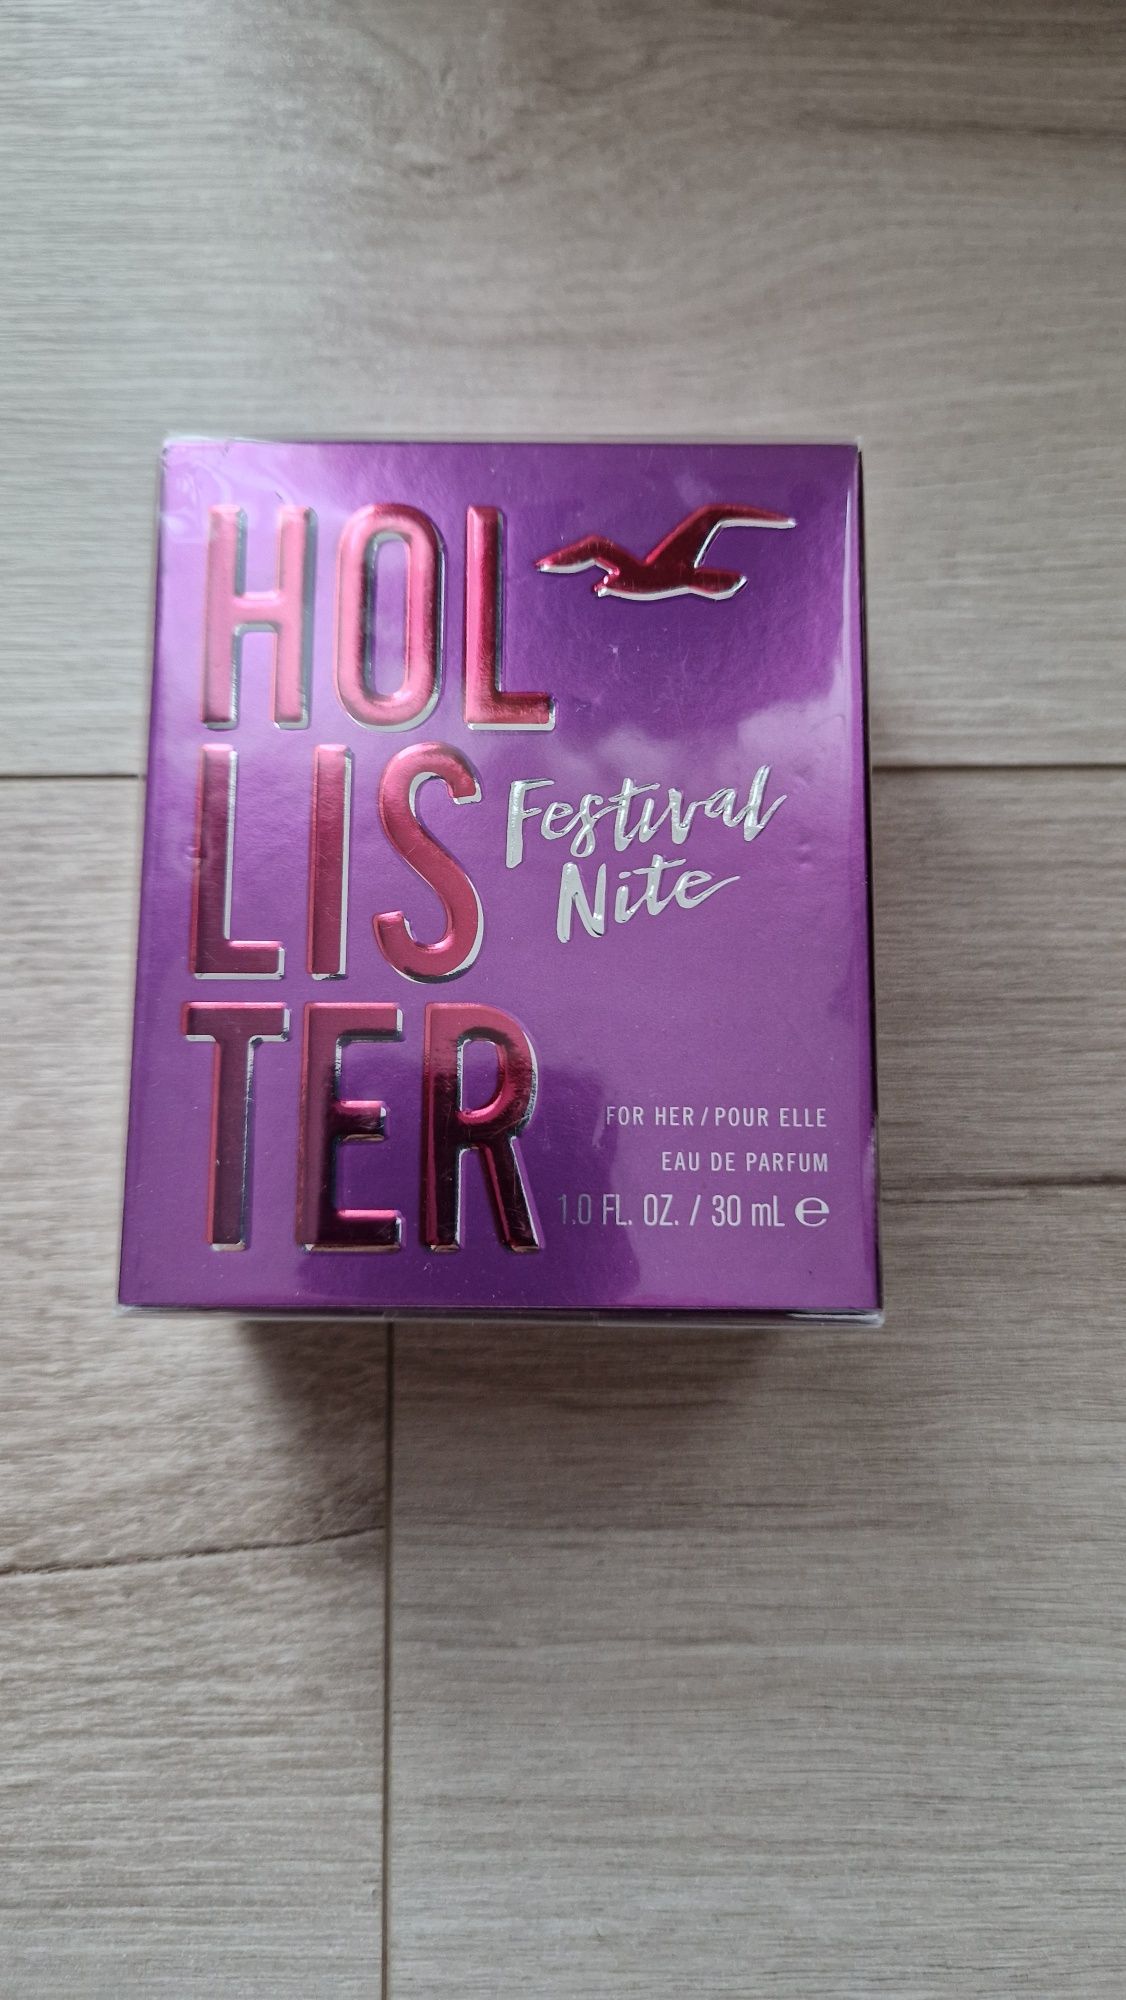 Perfumy hollister festival nite for her